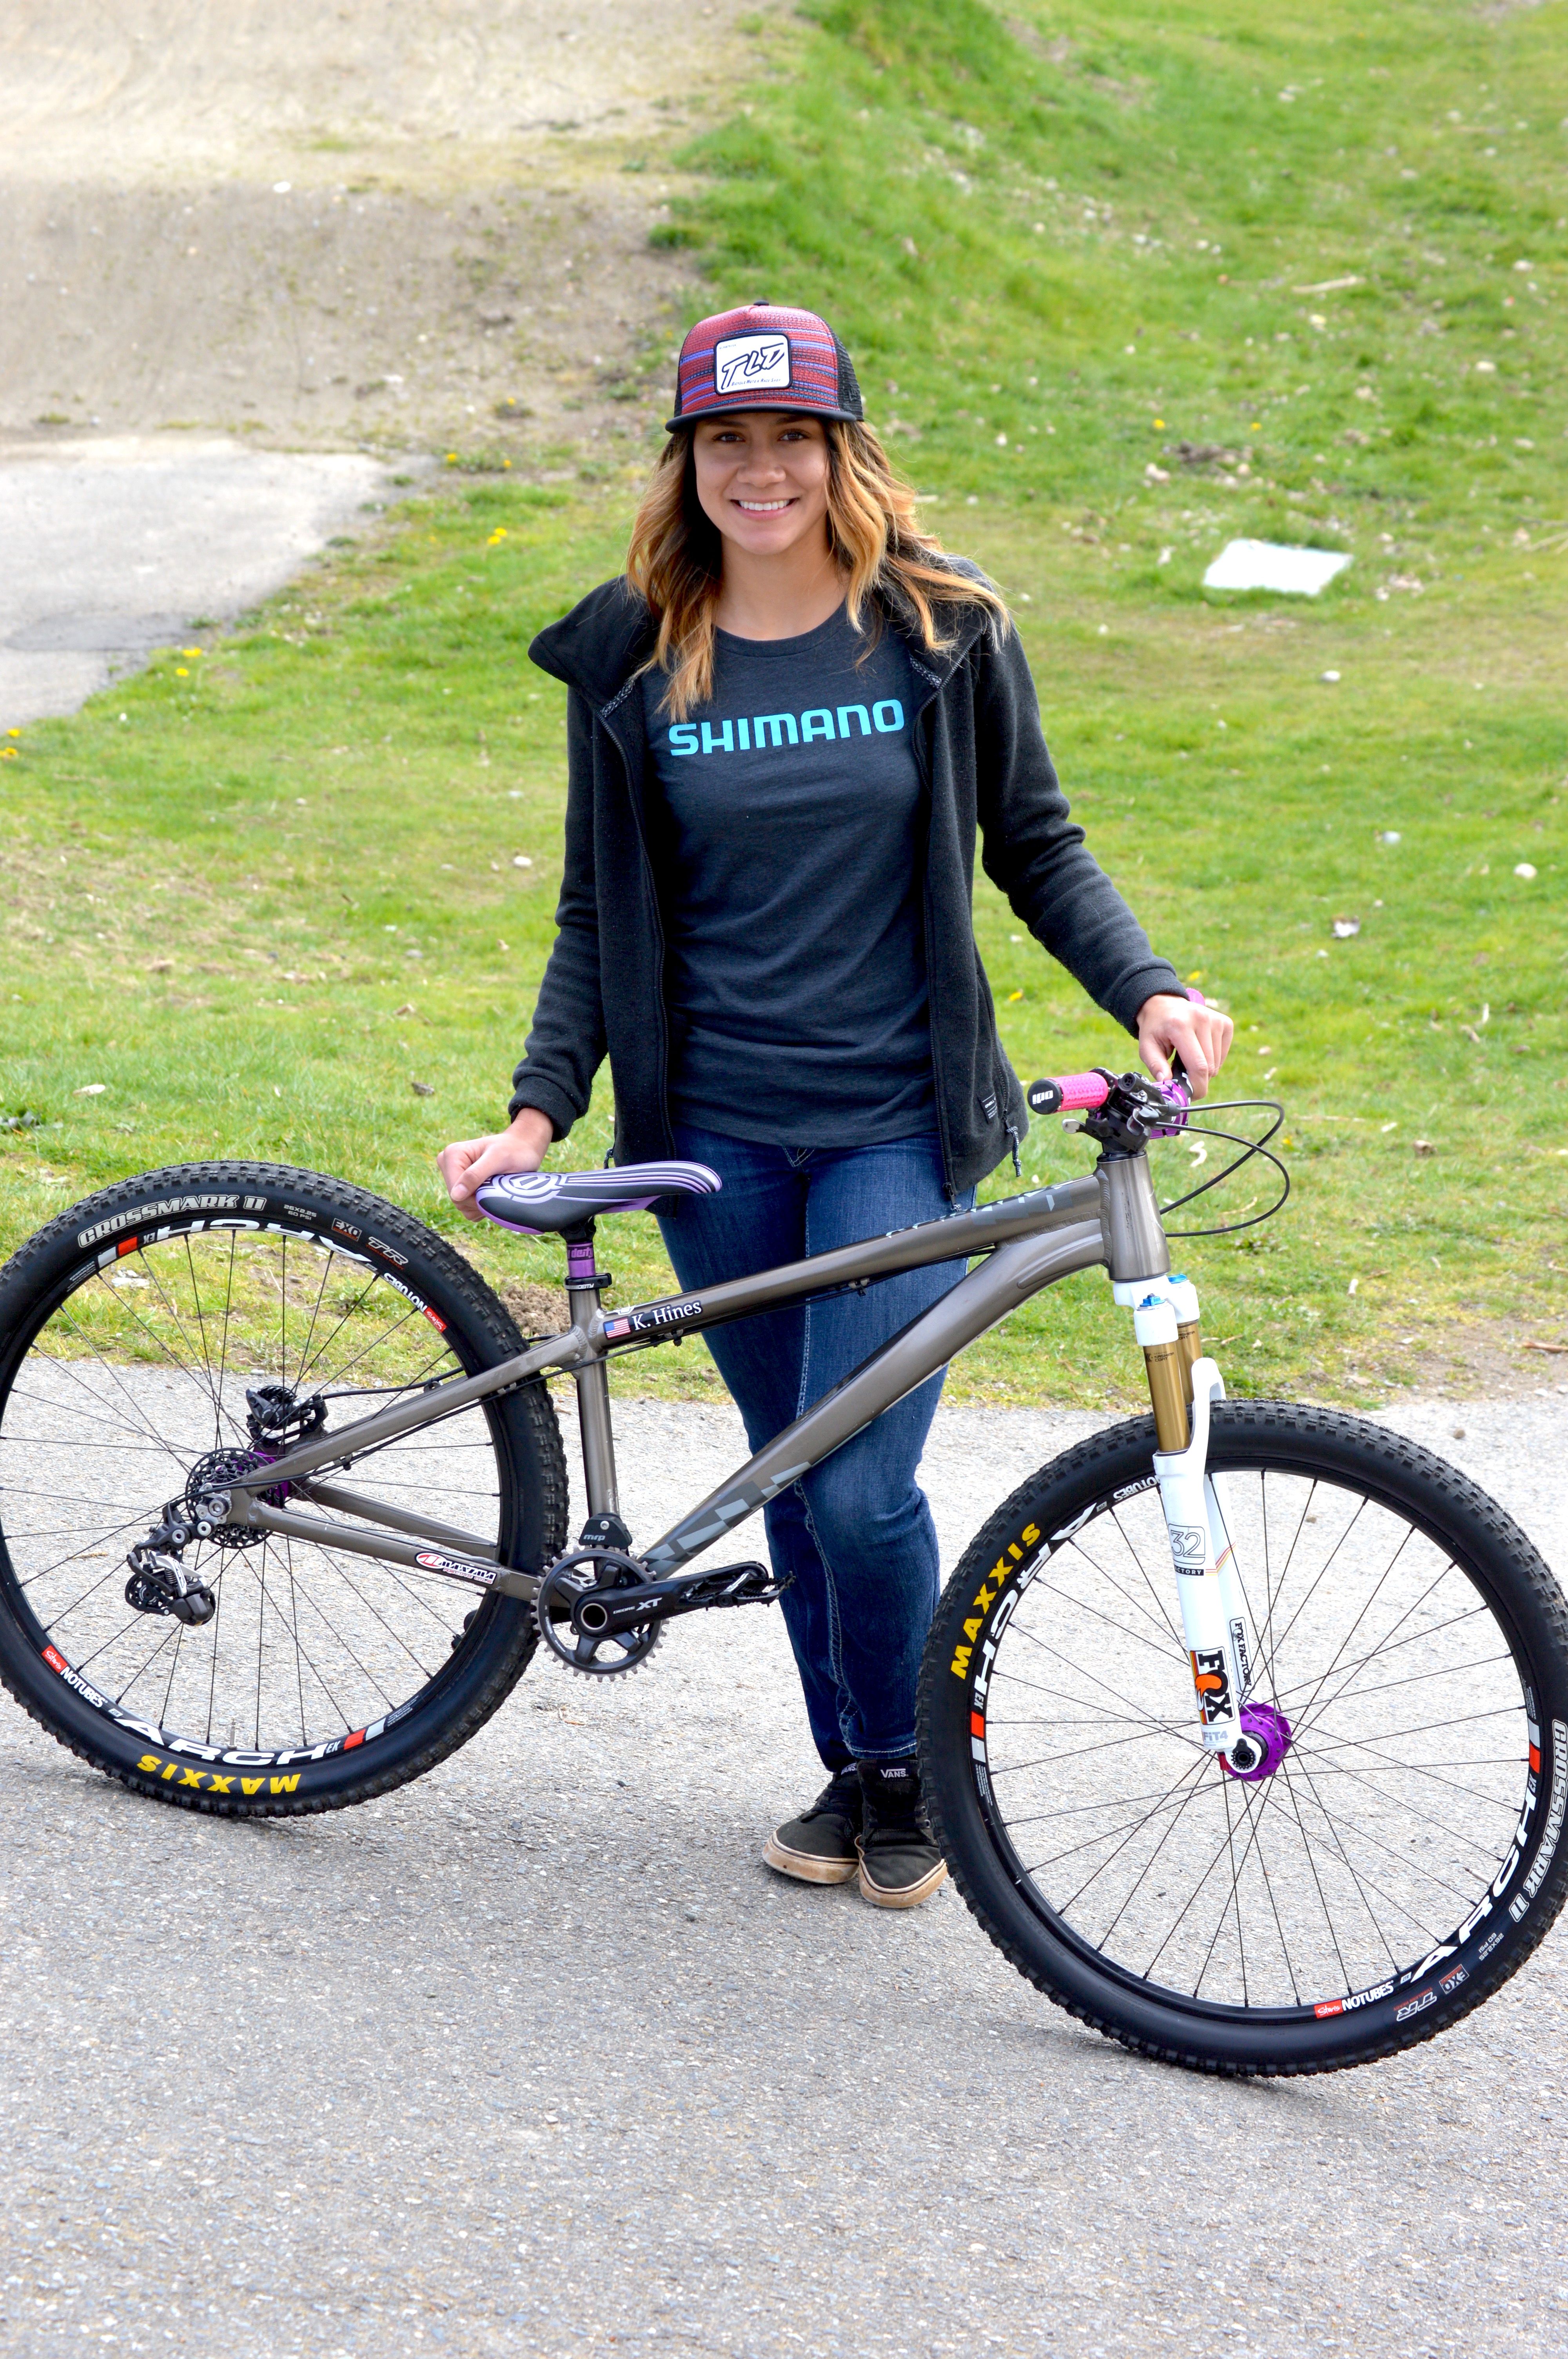 Burien resident Kialani Hines recently returned from competing in MTB in New Zealand. She has fond memories of training at SeaTac BMX and continues to work out at the neighborhood spot. 